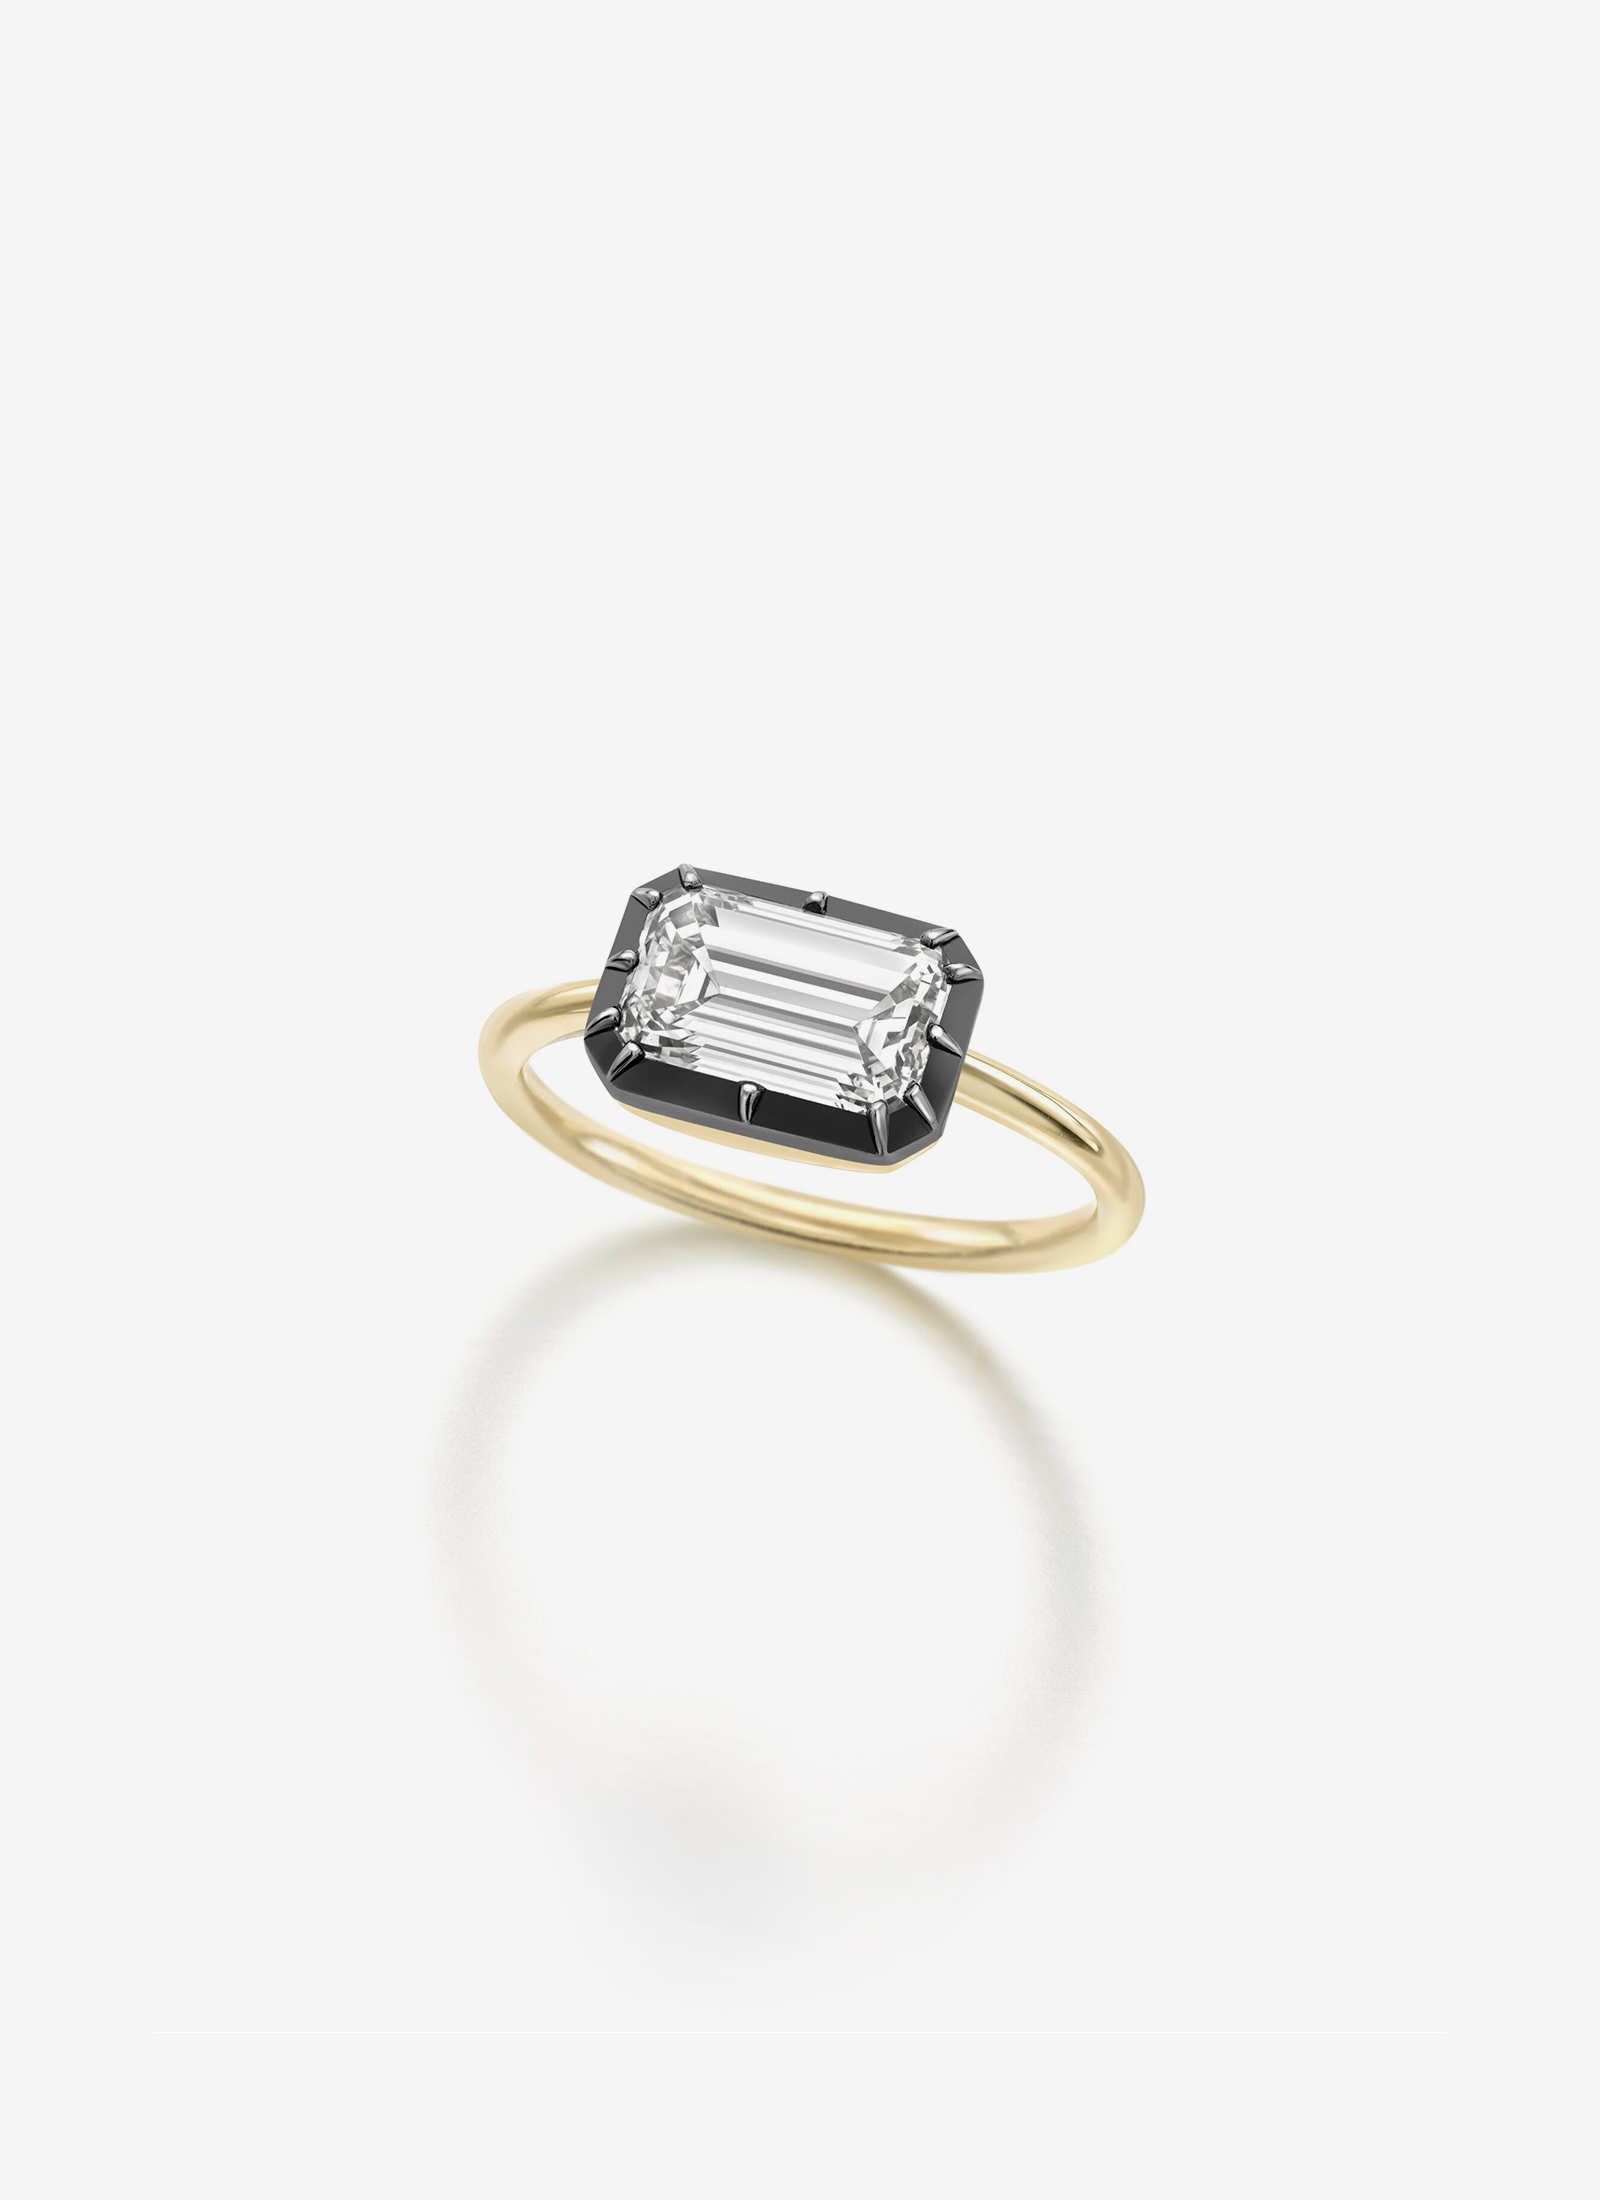 Button Back 1.50ct Emerald Cut Diamond East/West Ring - BWG